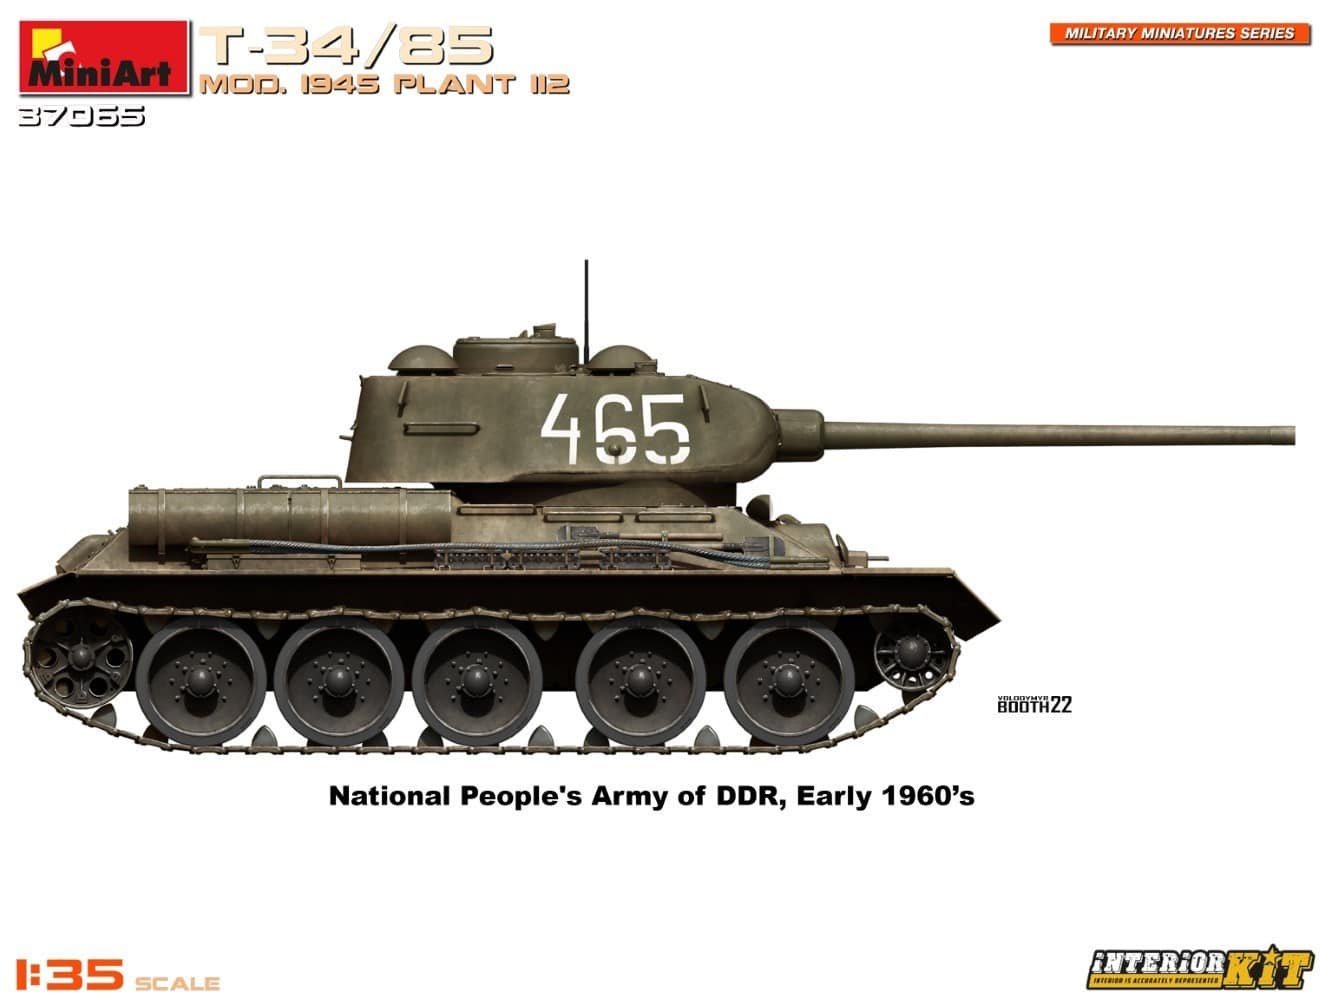 MiniArt 37065 T-3485 Mod. 1945. Plant 112. Interior Kit Painting and Marking-1